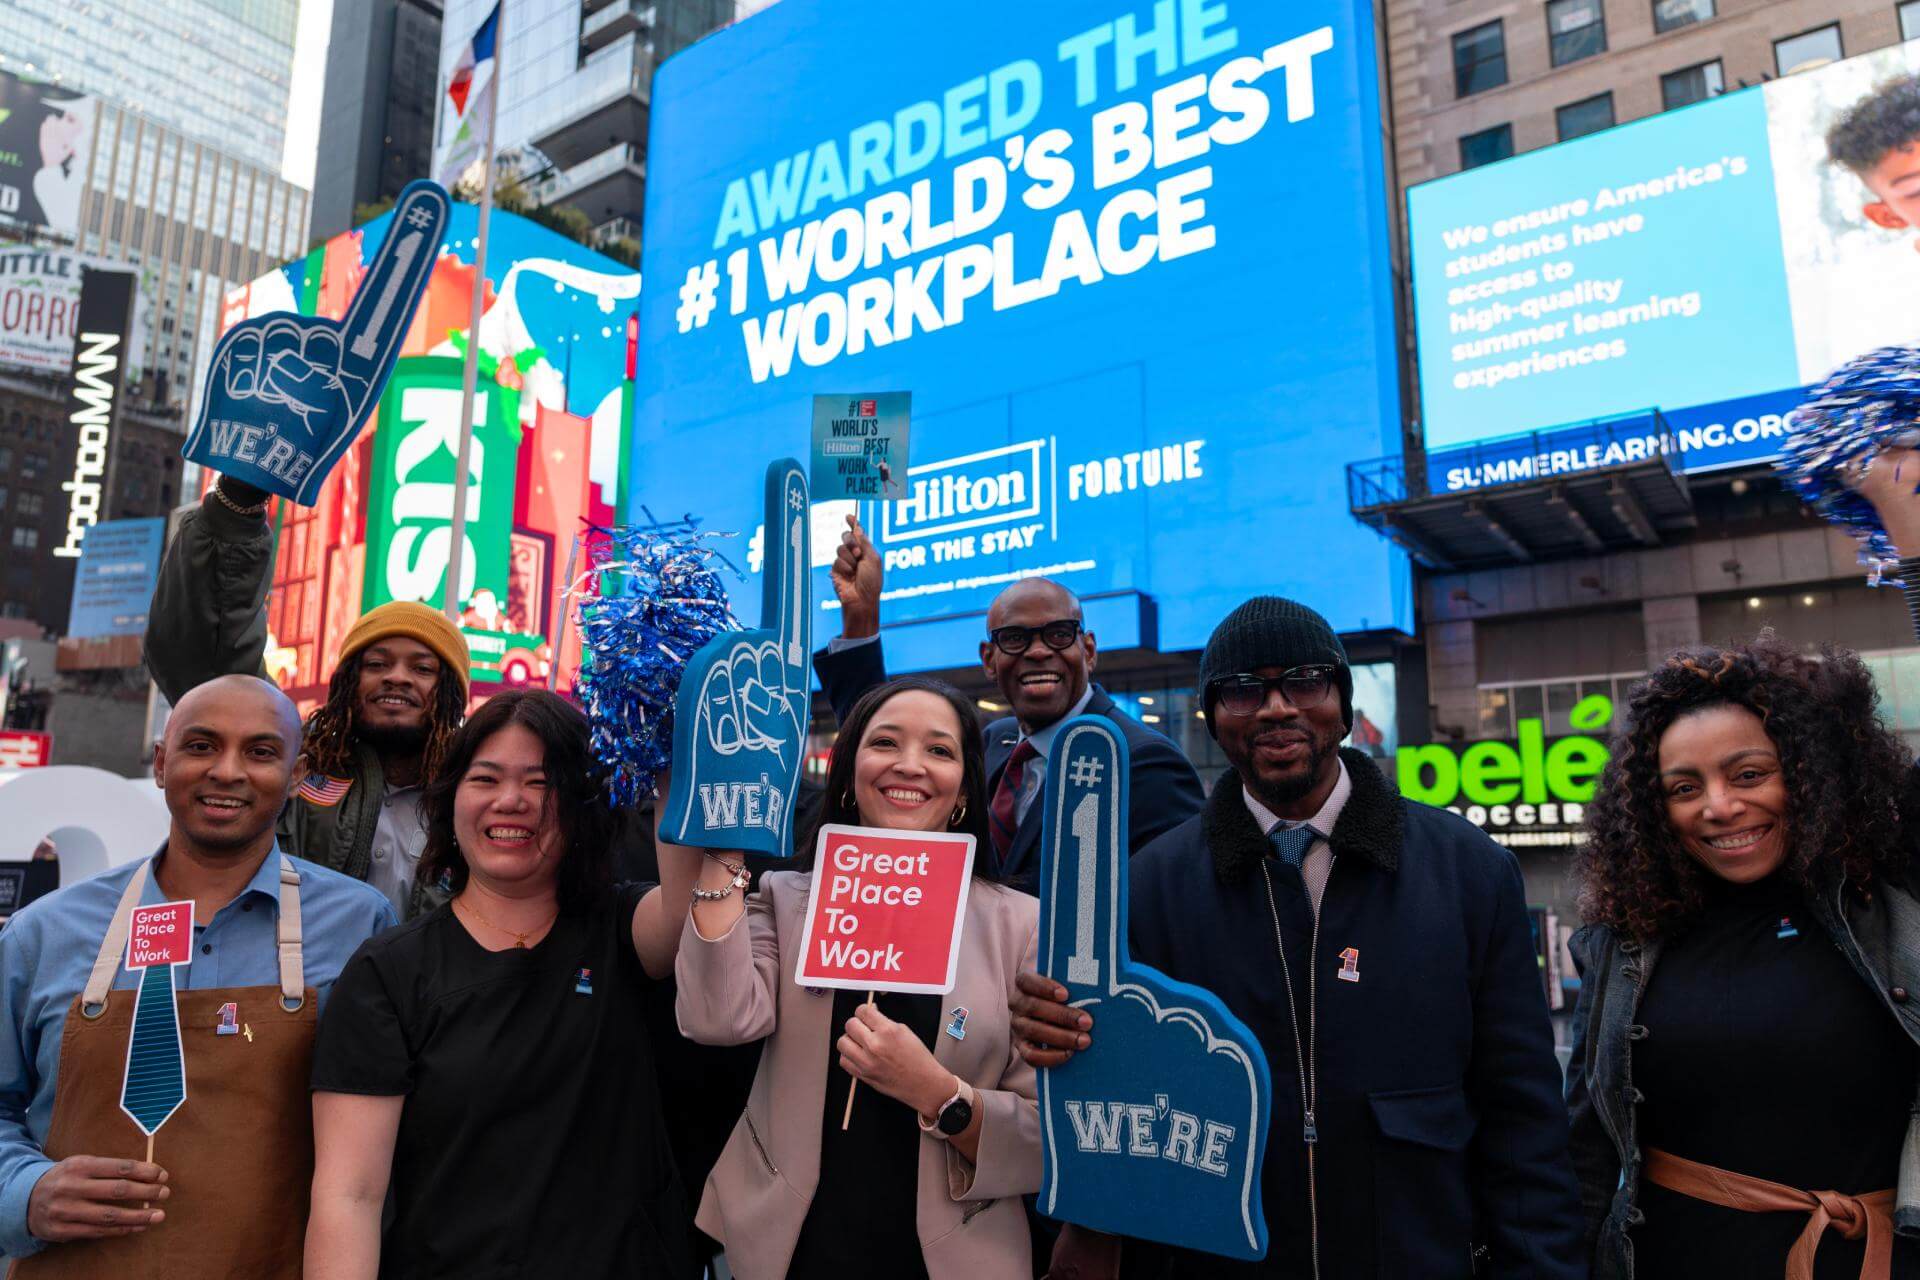 Employees celebrating in front of a billboard for #1 World's Best Workplace